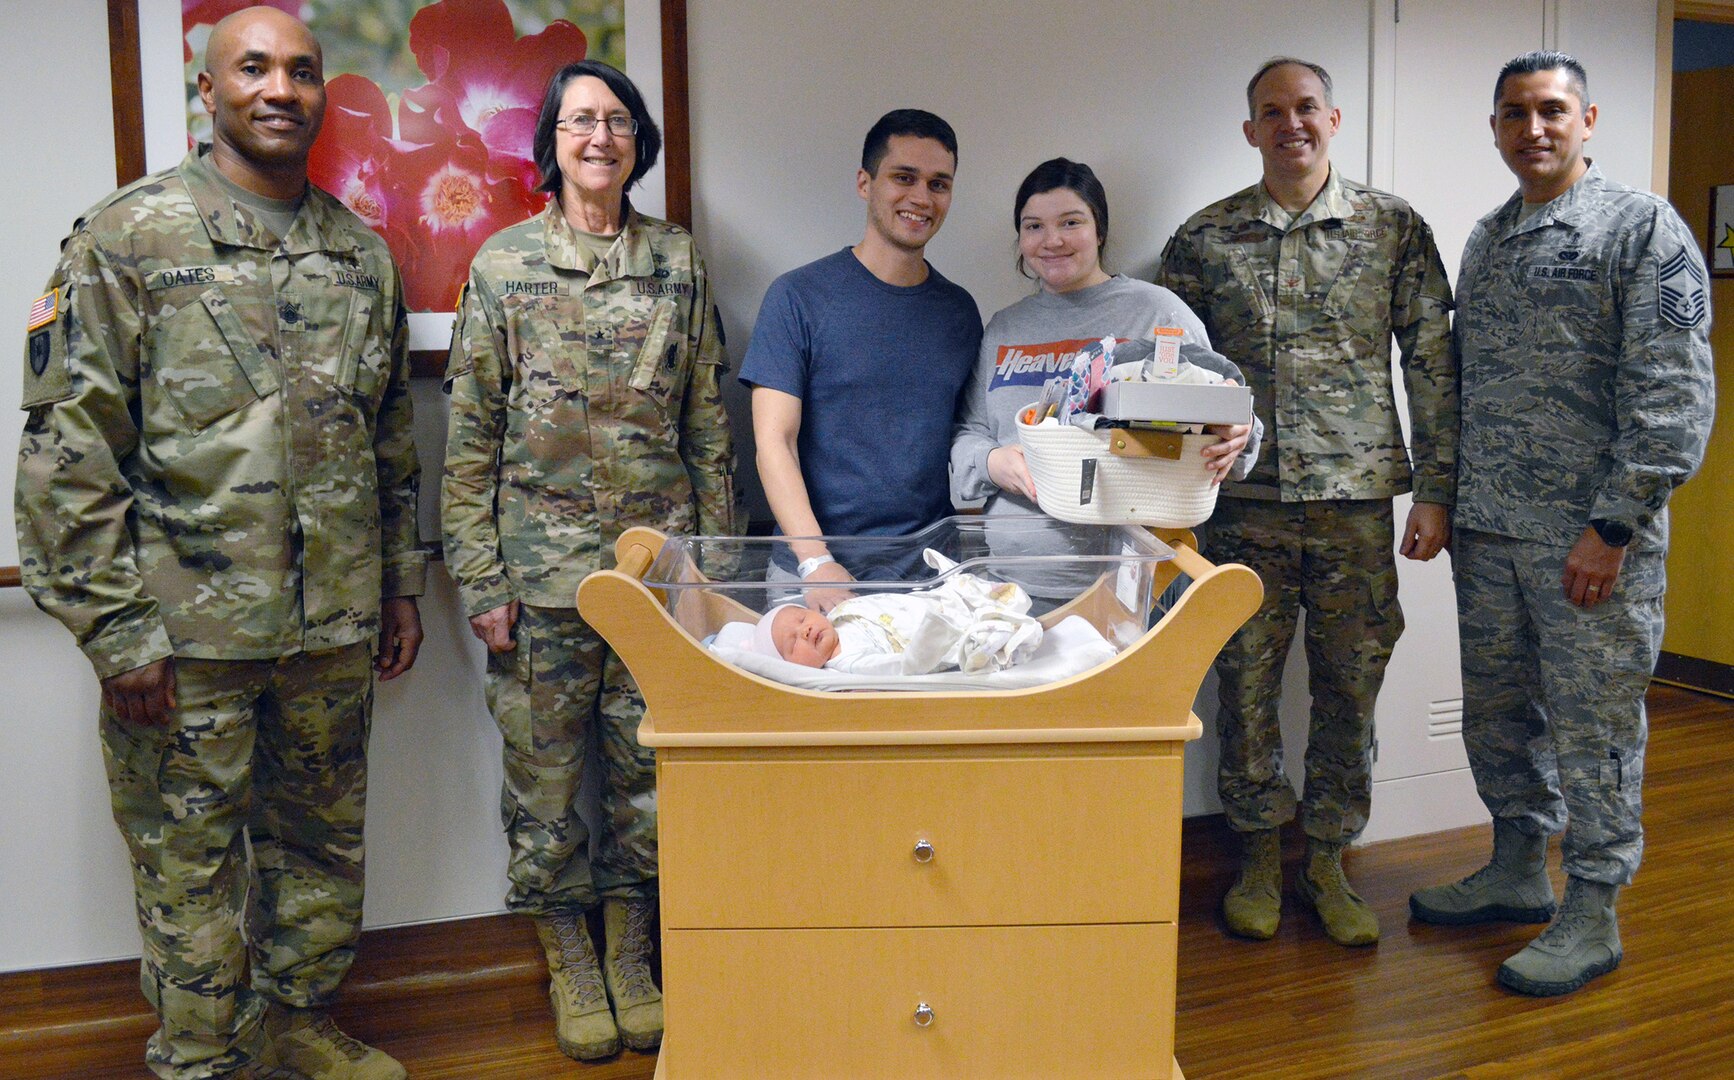 The Brooke Army Medical Center and 959th Medical Group command teams pose for a photo with Airman 1st Class Anna Tritley and her husband, Sean, Jan. 3, 2020 to congratulate them on the birth of their daughter, Cora Noel. The 7-pound, 9-ounce, 19.5-inch-long baby girl was BAMC’s first baby of the new year, born at 1 a.m. Jan. 1, 2020.